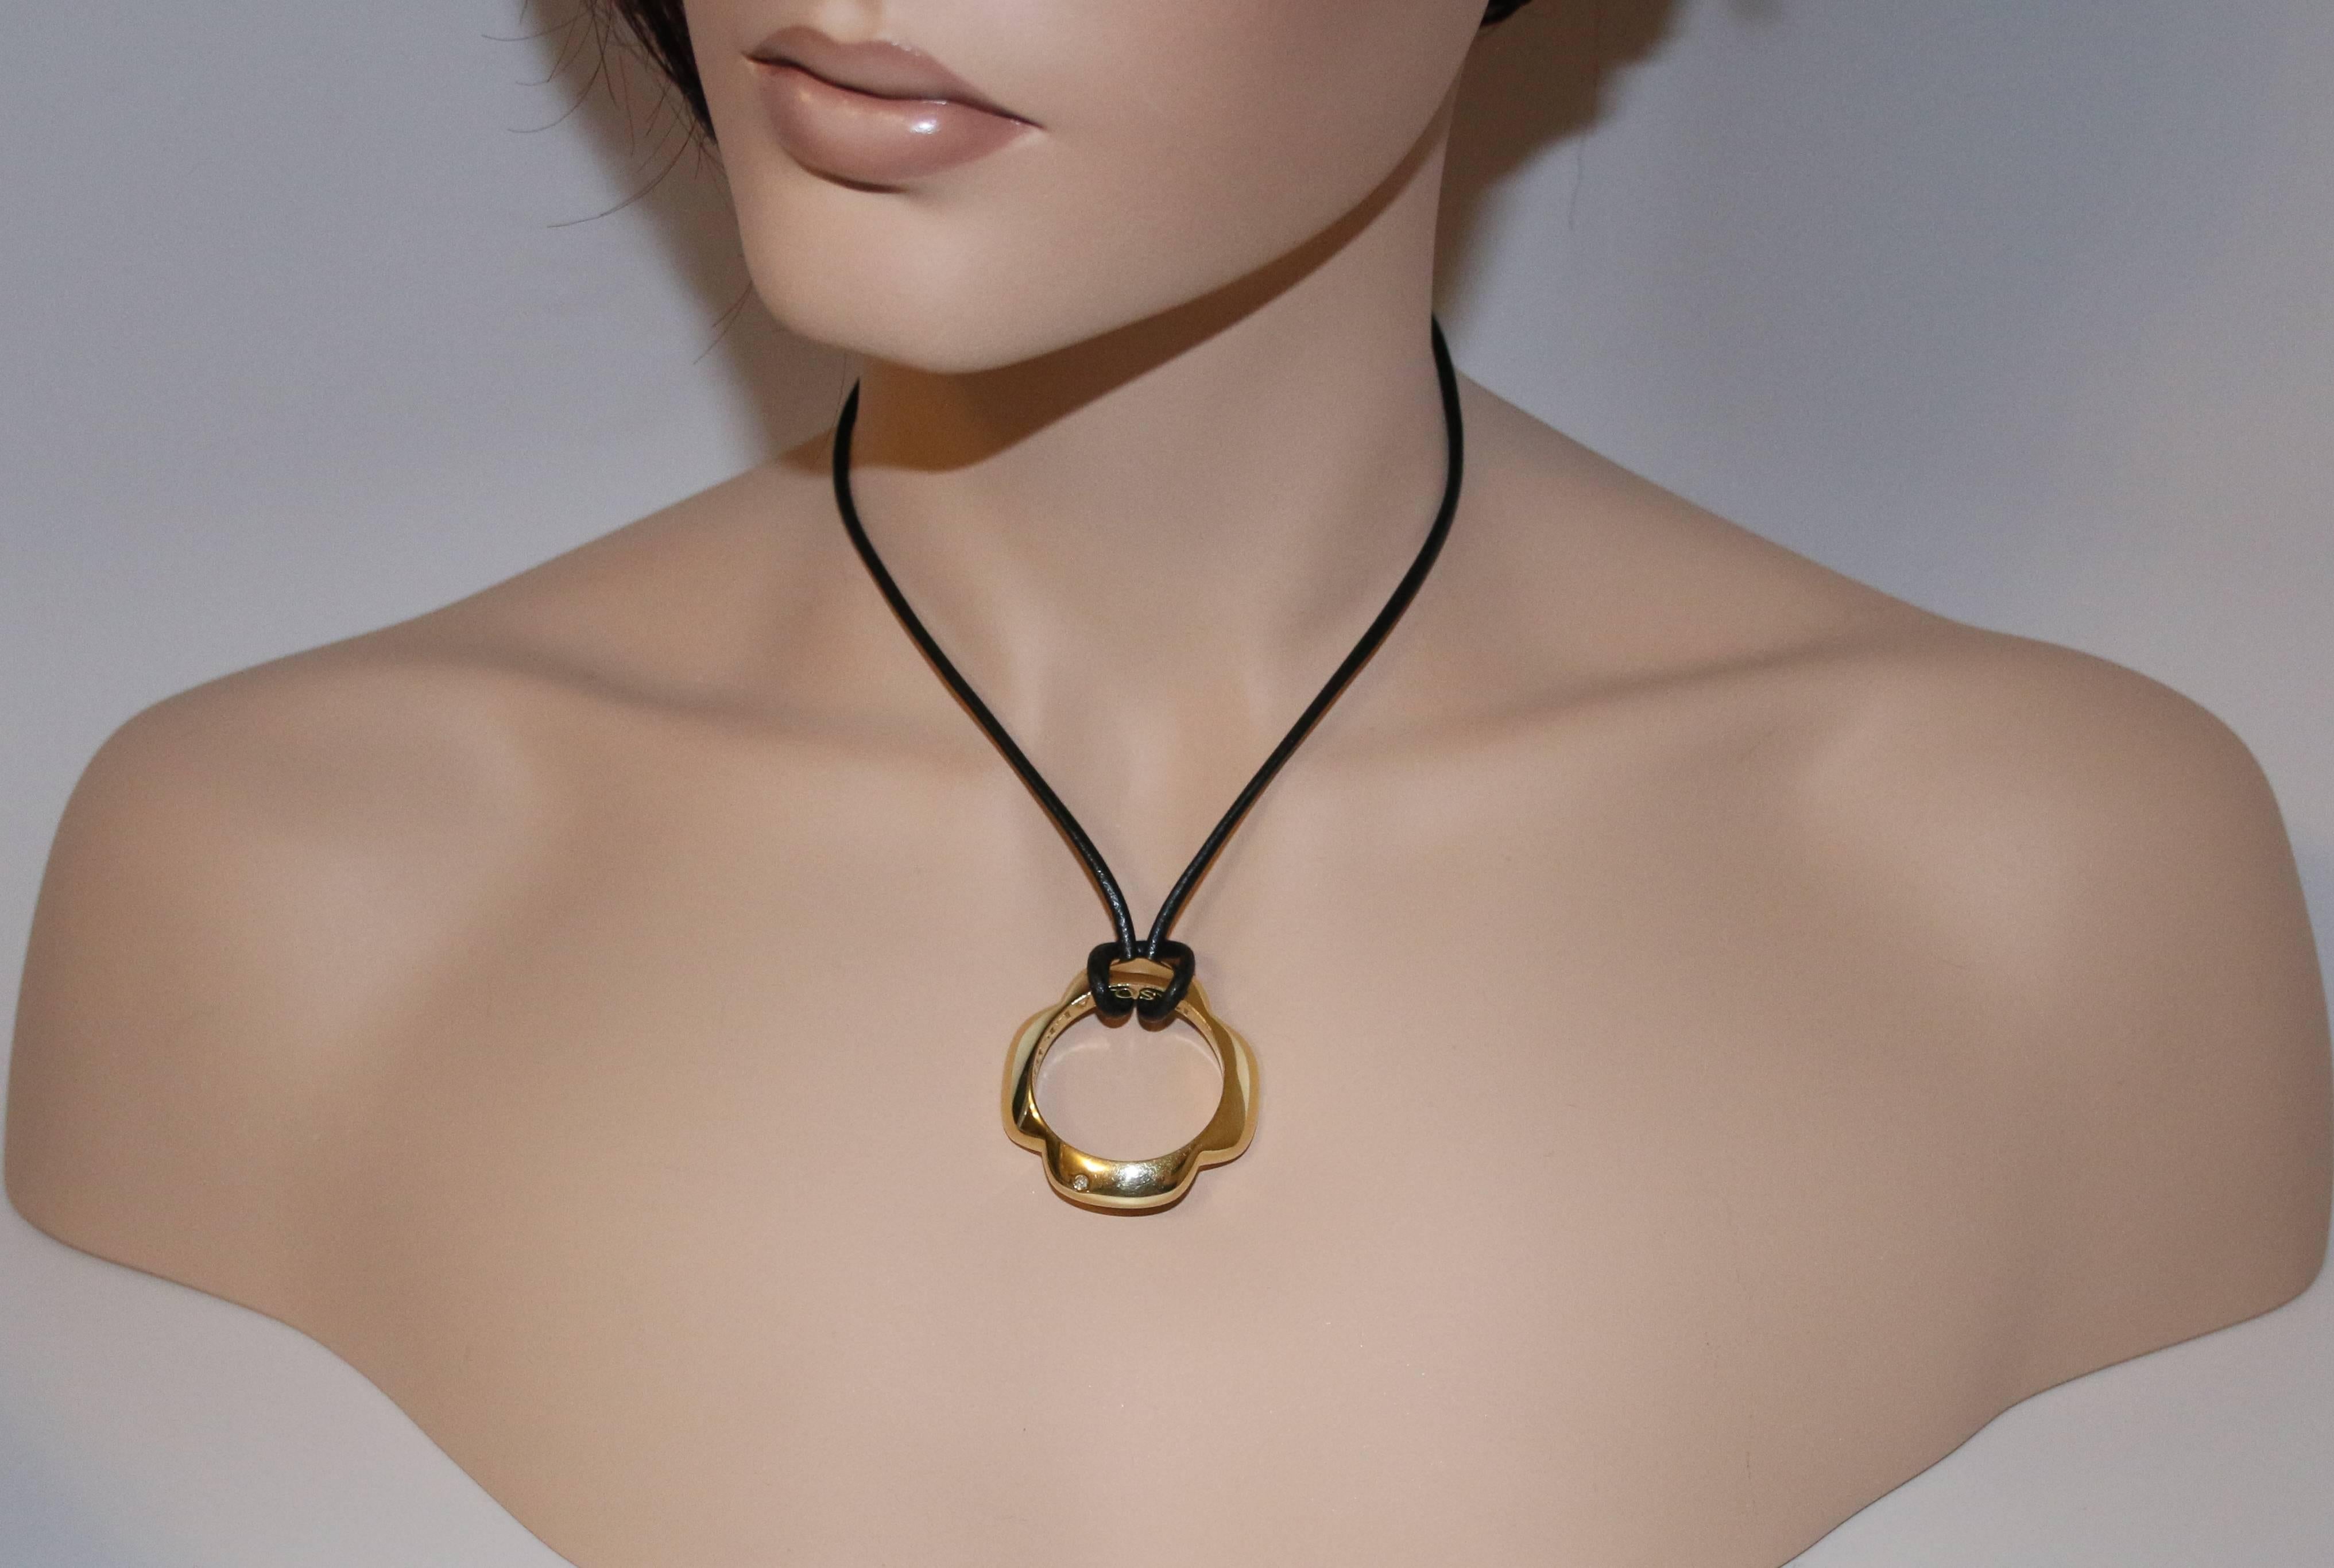 Modern Pasquale Bruni Metafore Gold Pendant Necklace For Sale